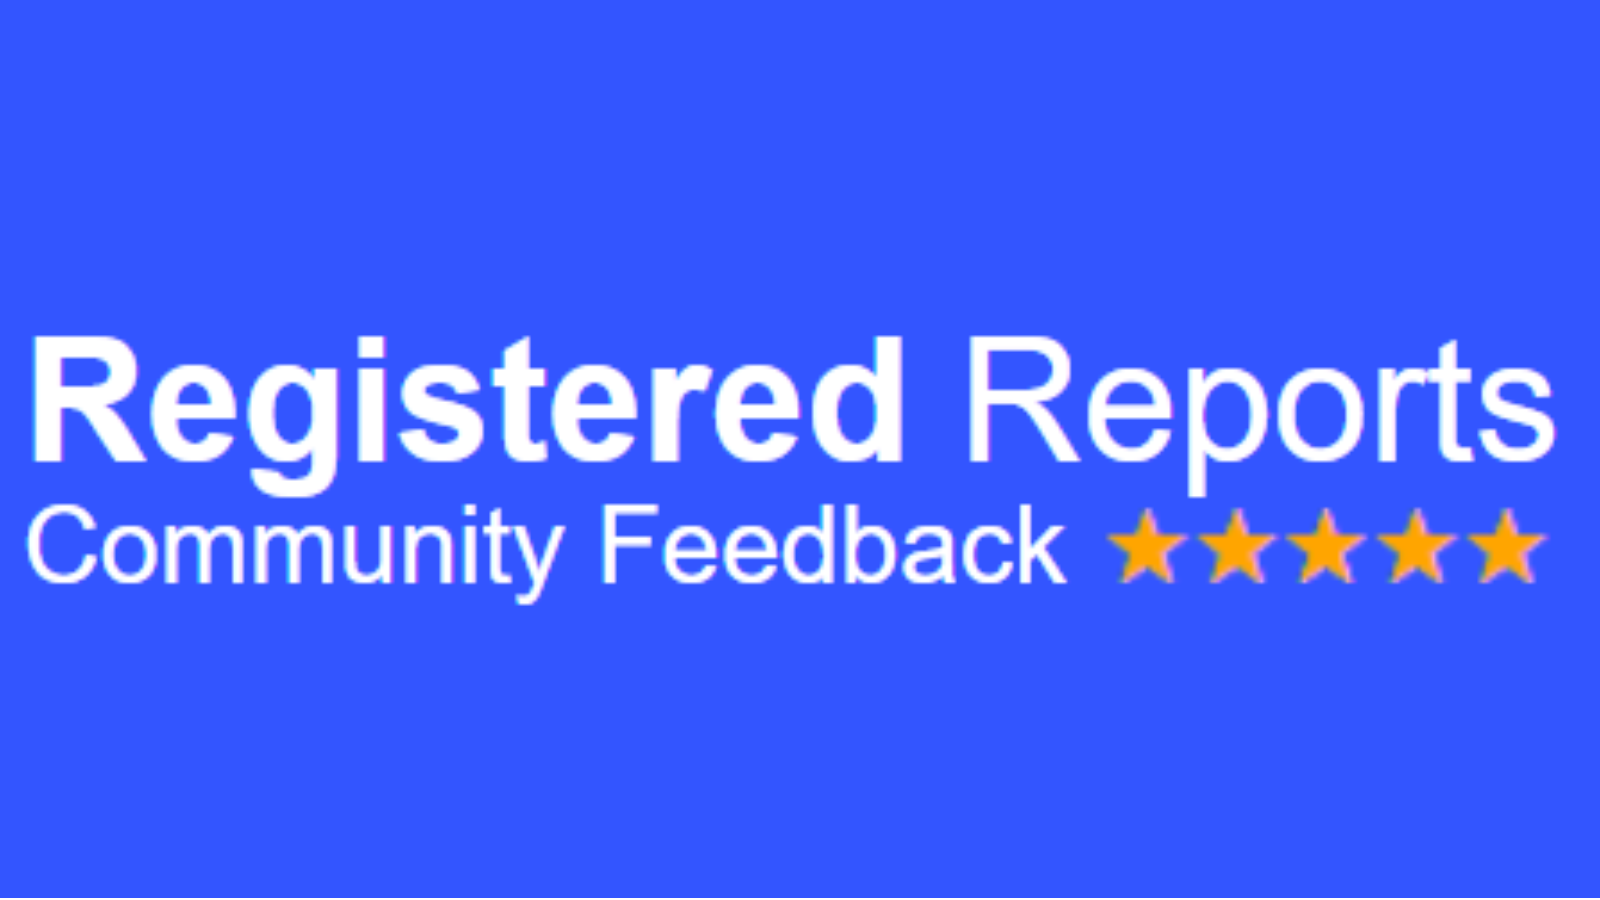 Text: Registered Reports Community Feedback